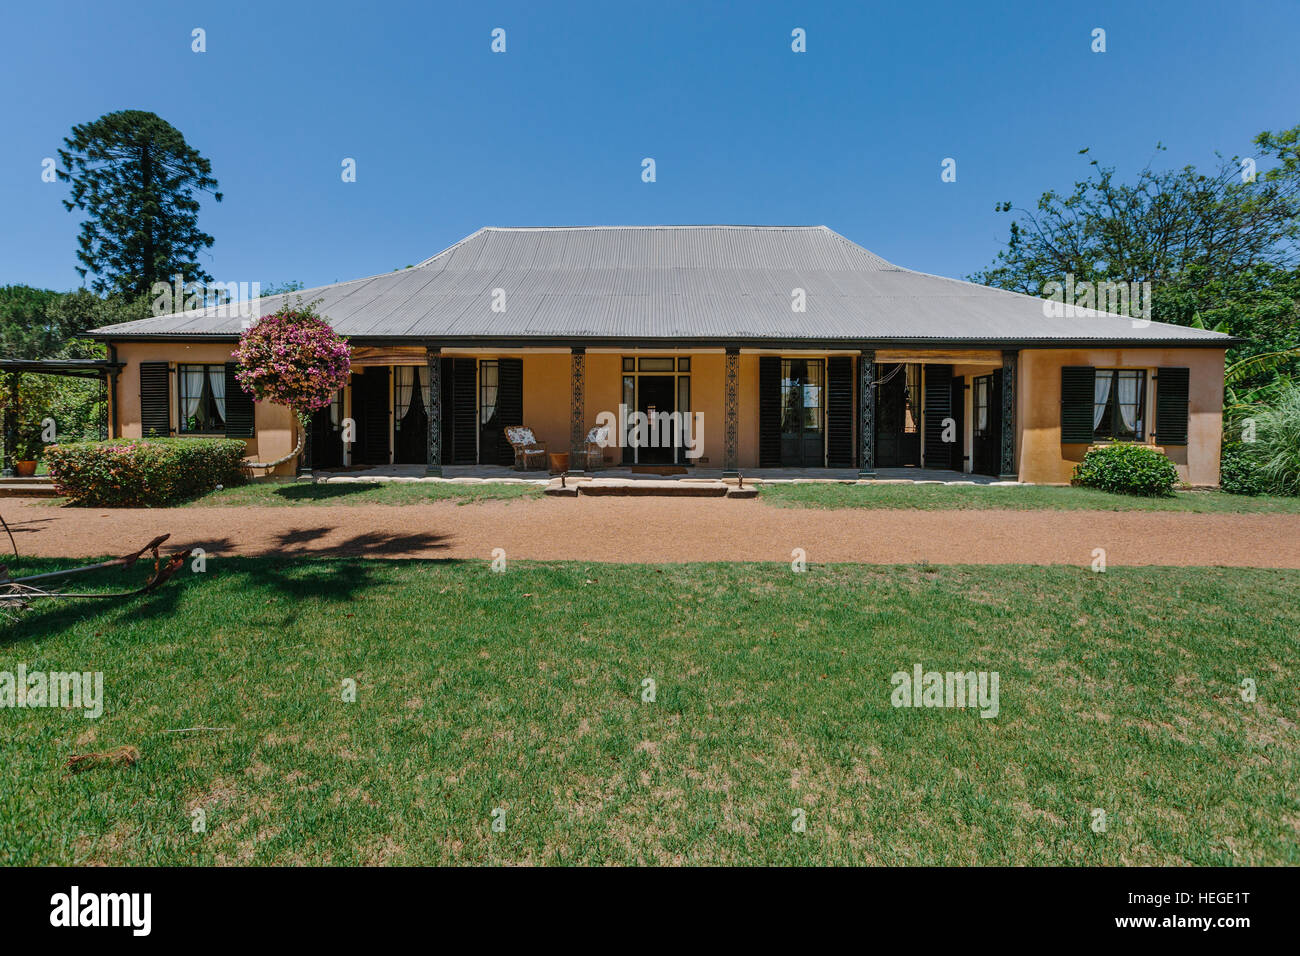 External view of Elizabeth Farm, an historical homestead museum in Sydney, Australia built for Governor Macarthur and his family Stock Photo